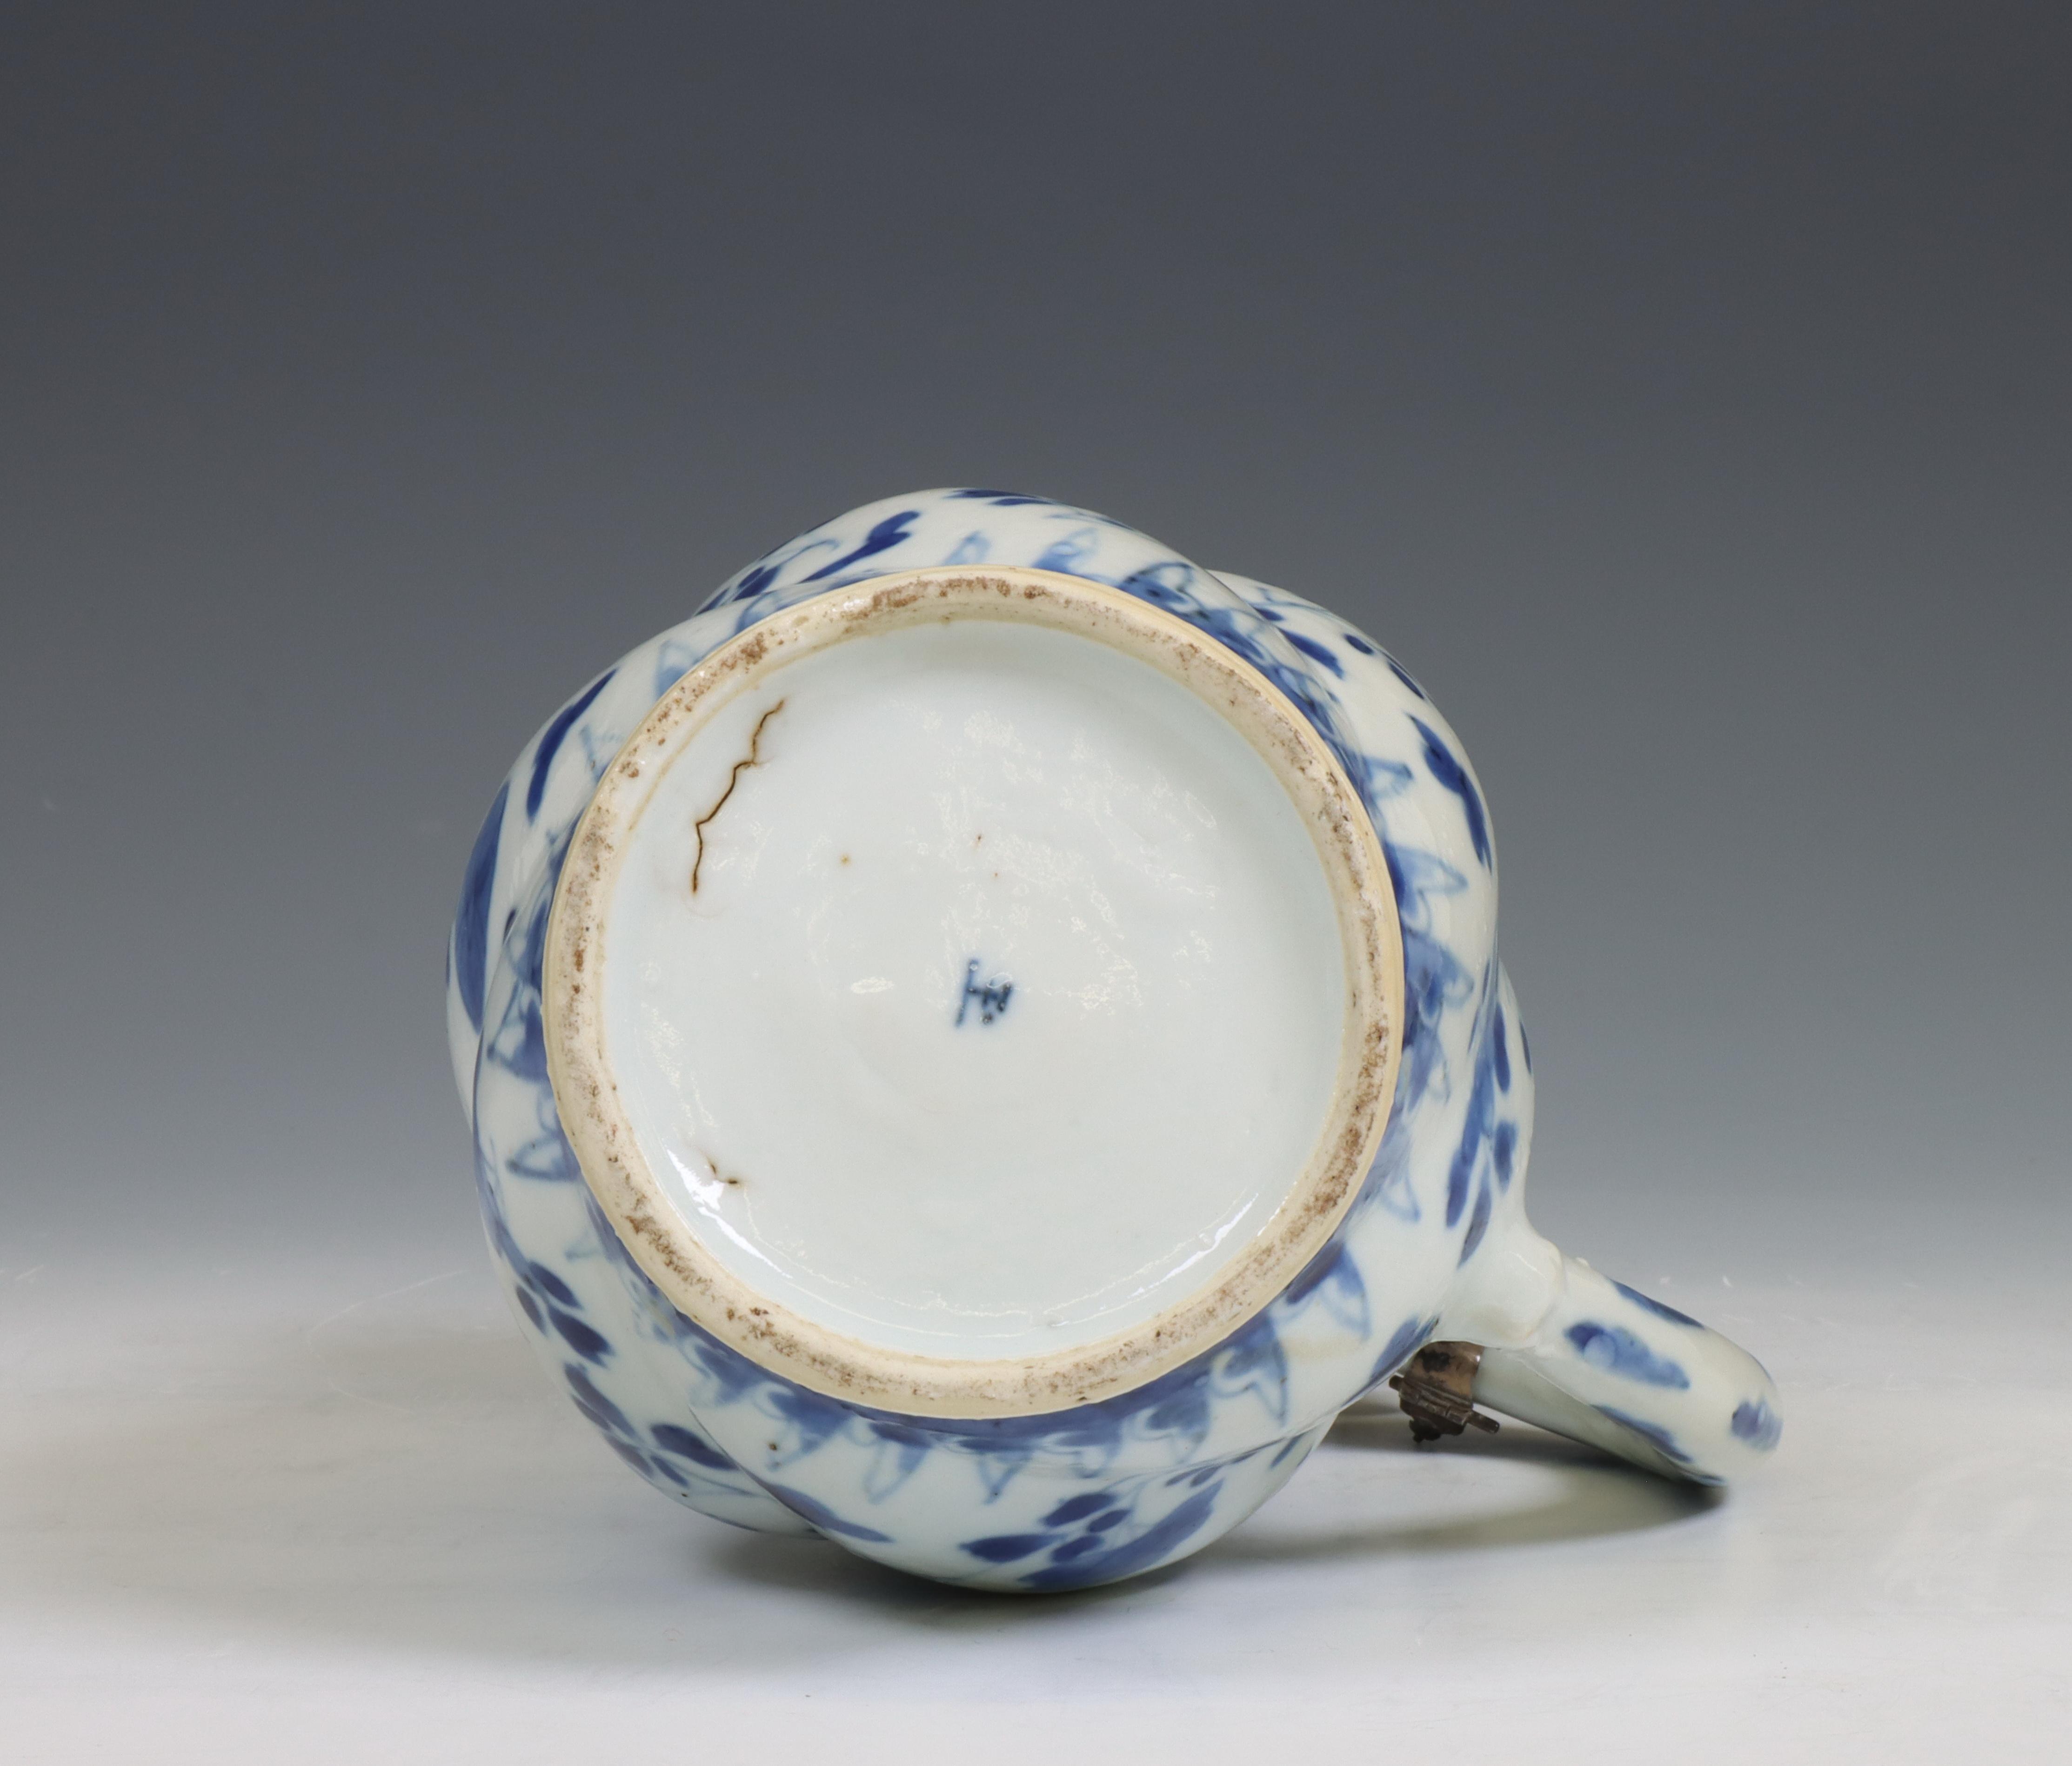 China, a blue and white porcelain gadrooned ewer and silver-mounted cover, Kangxi period (1662-1722) - Image 5 of 6